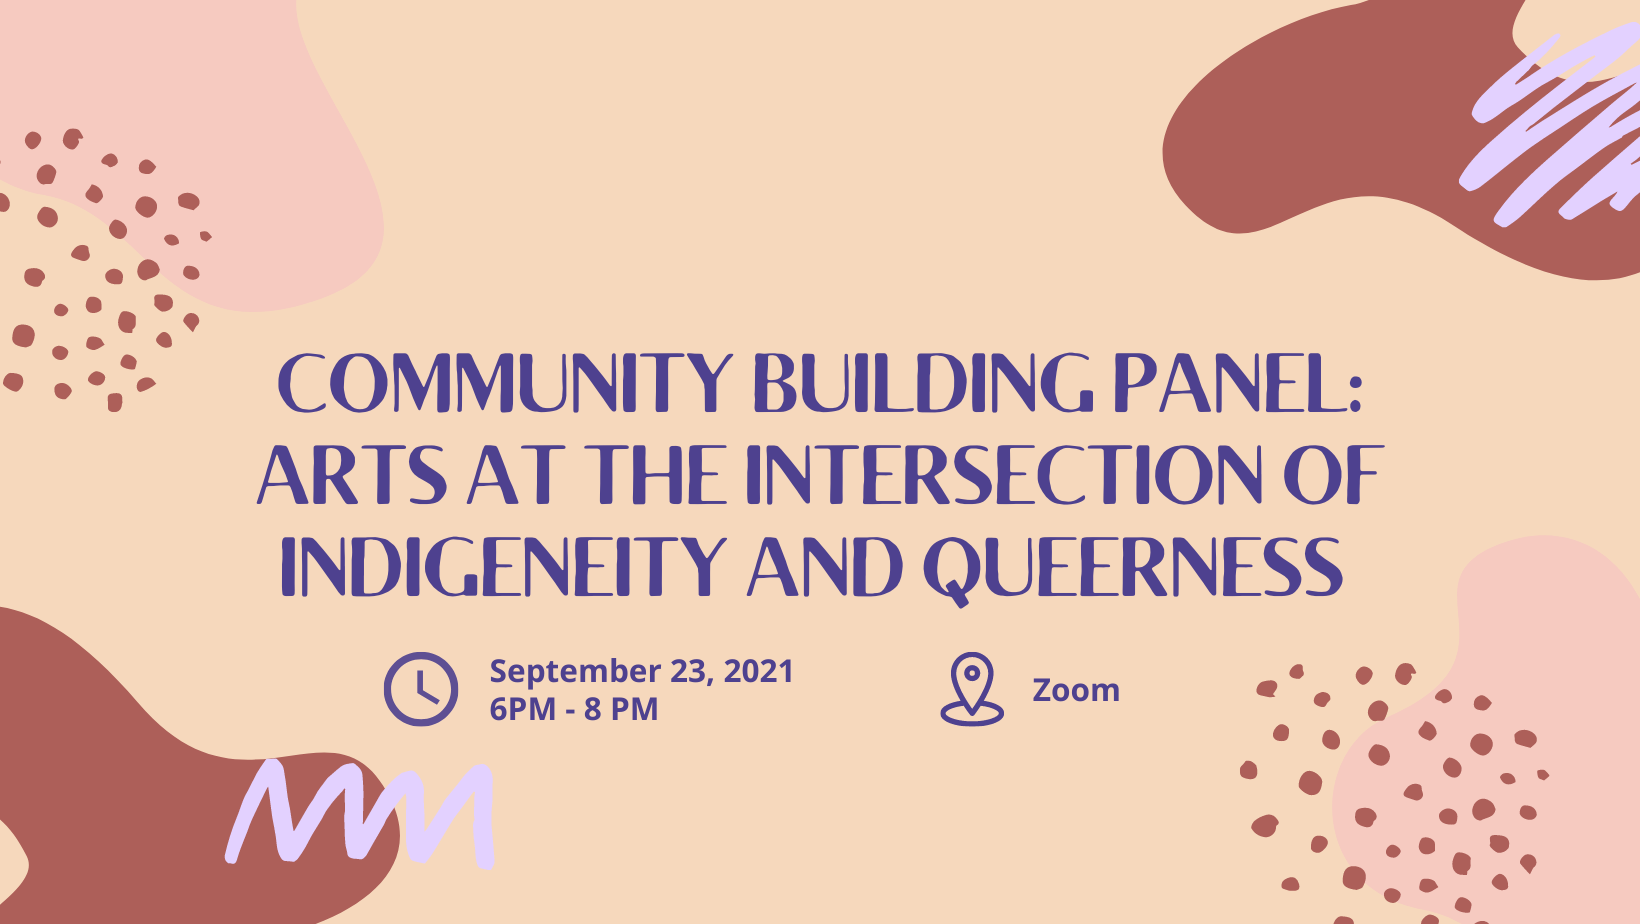 Orange background with purple and maroon shapes and design with purple text that says Community Building Panel Arts at the Intersection of Queerness and Indigeneity